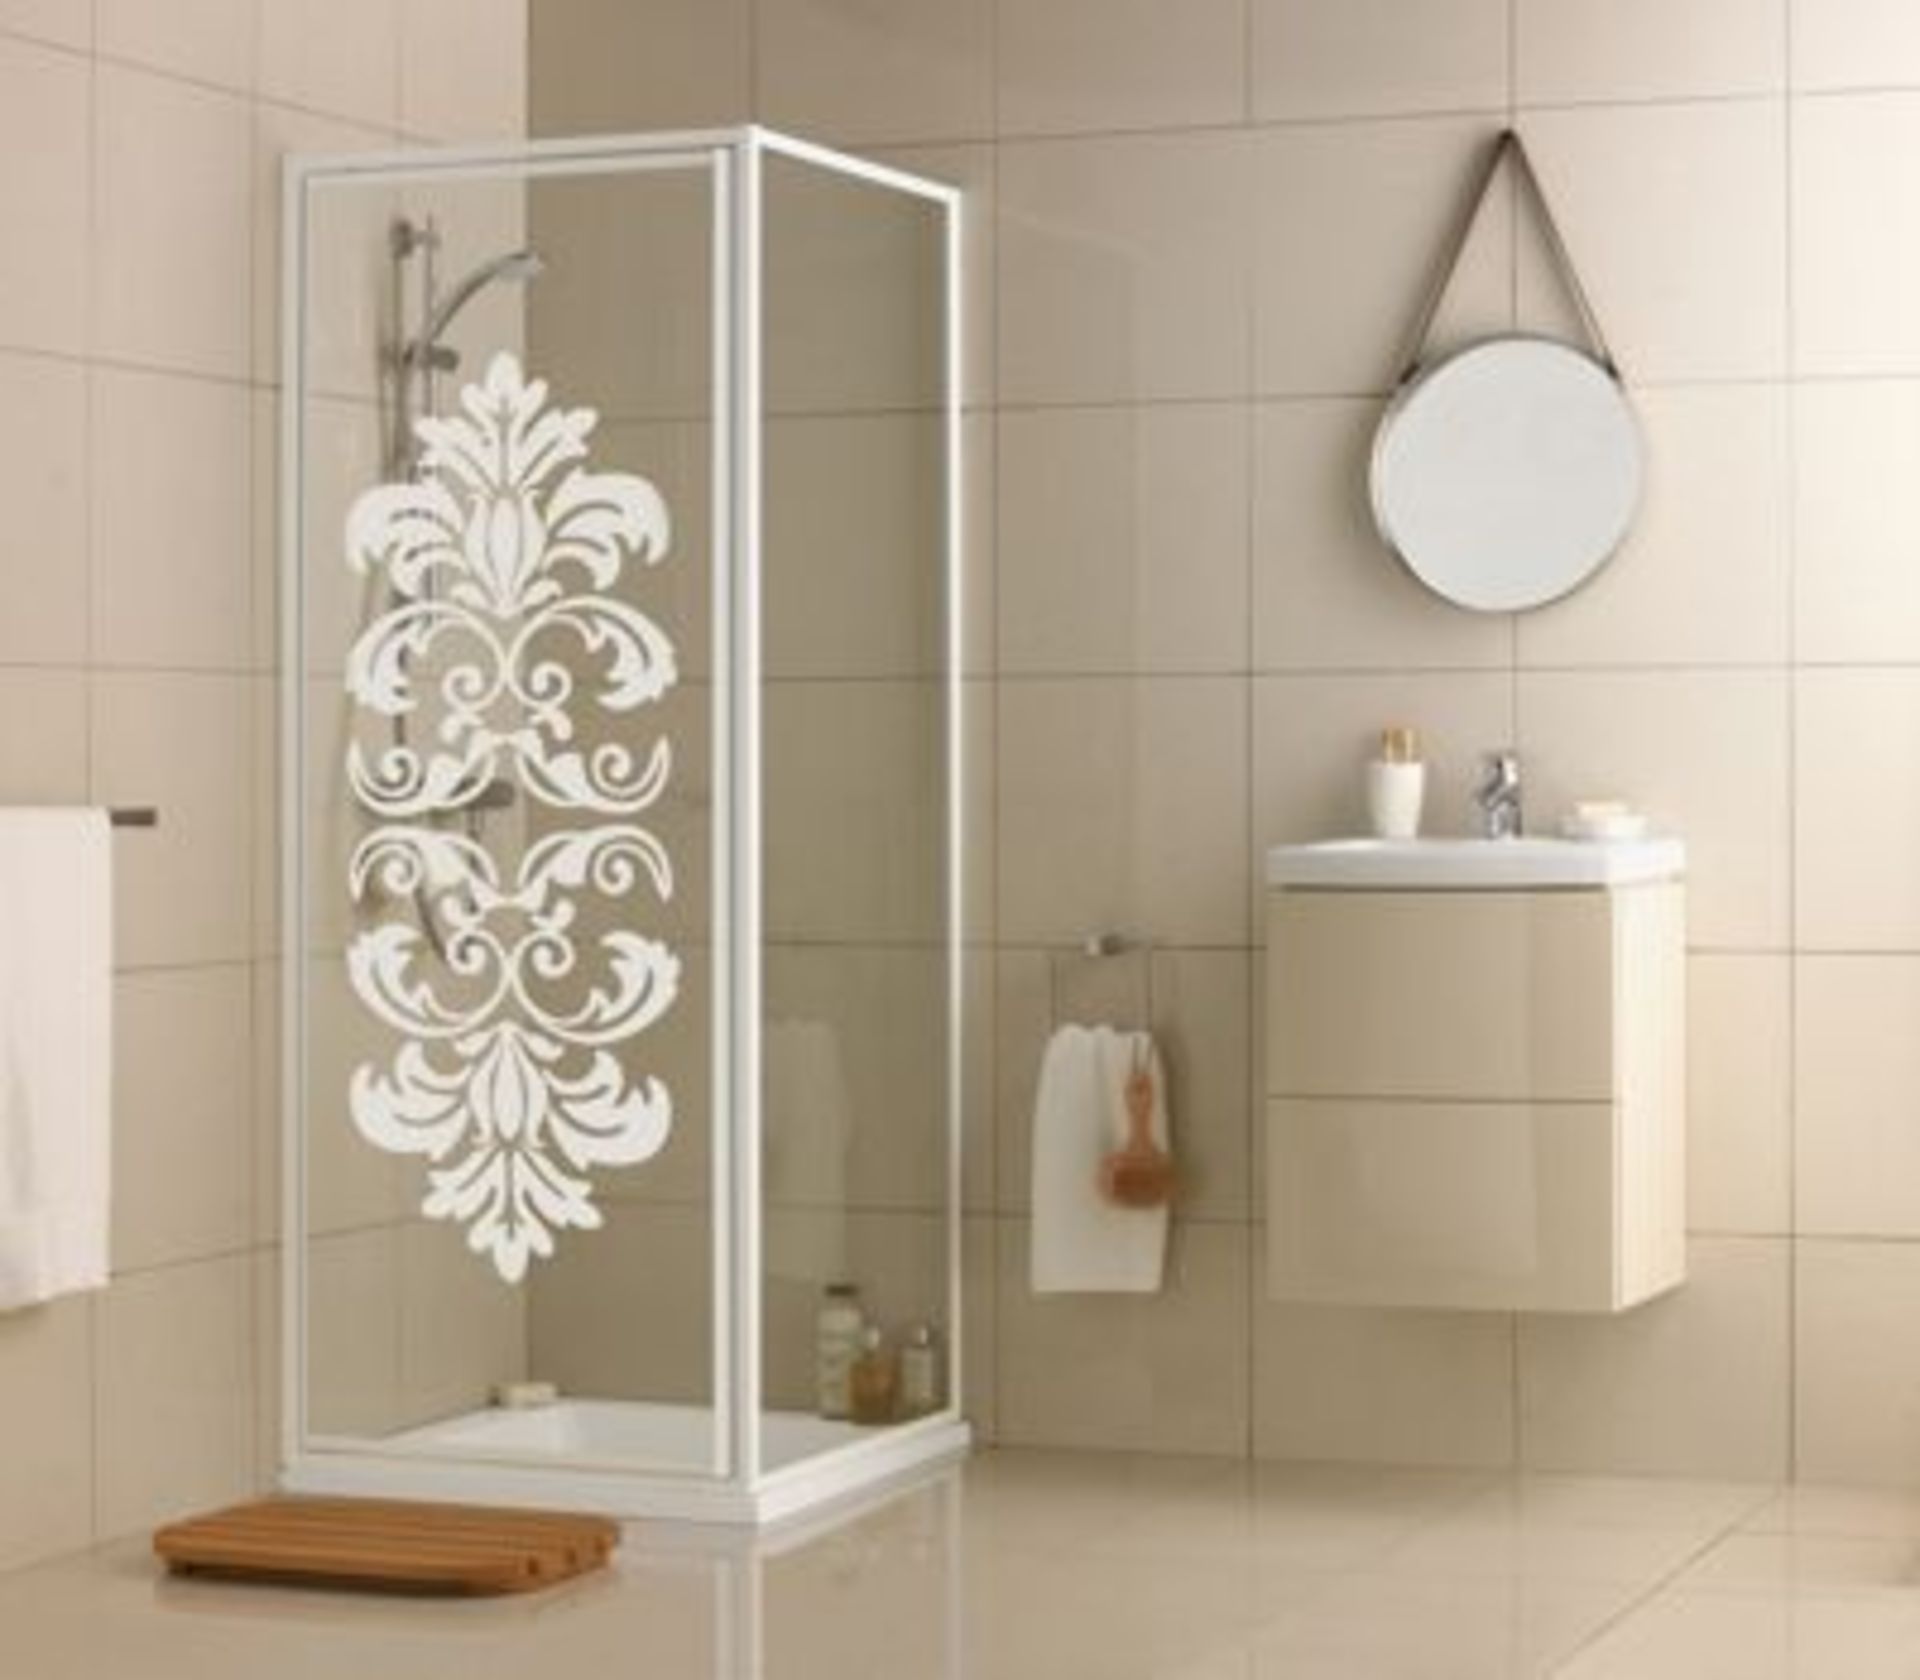 (AAA143) Aqualux Crystal Pivot Shower Enclosure - 760 x 760mm - White Damask. Brand New & Sealed.